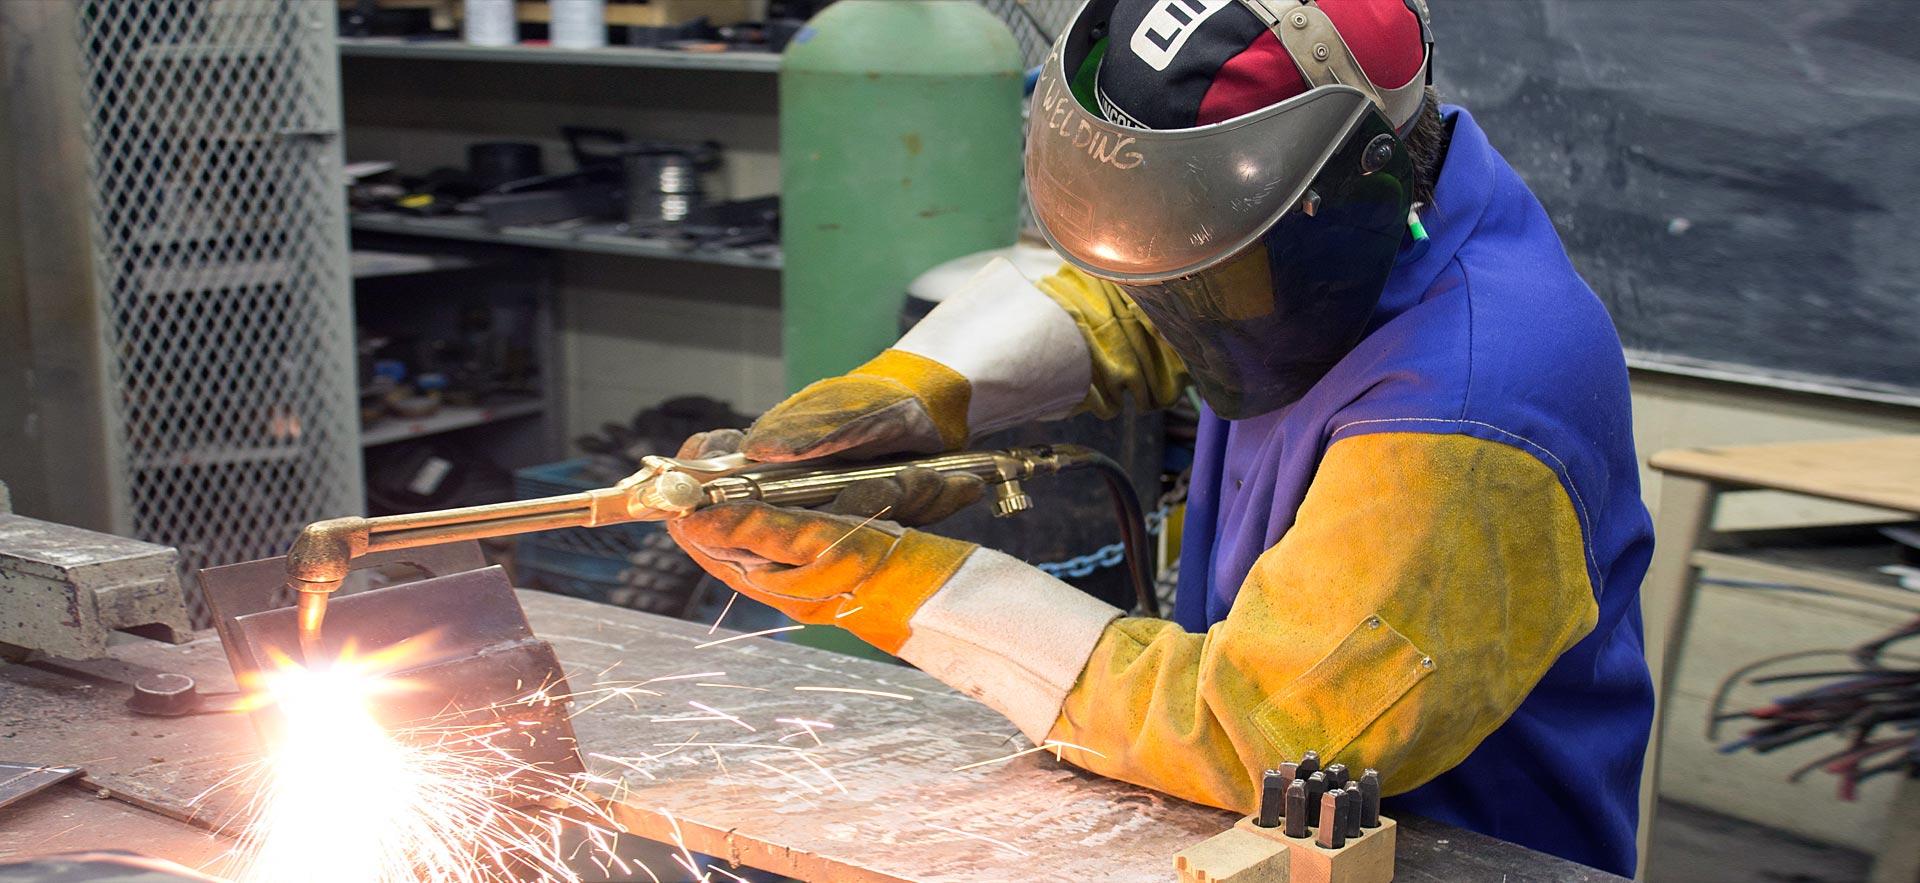 A male Welding Techniques student works on his welding technique.  